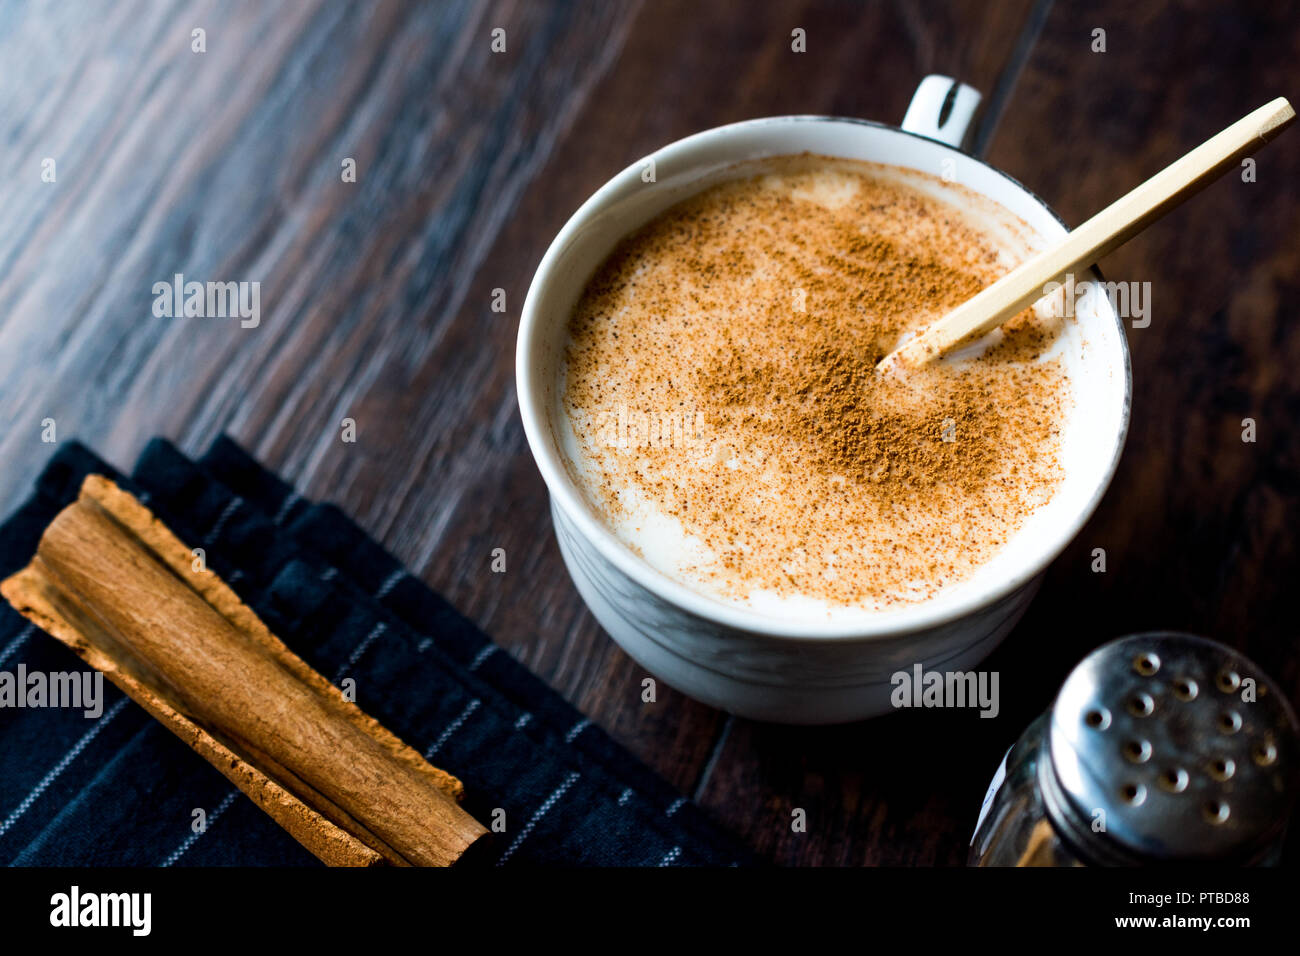 File:Salep on a wooden table.jpg - Wikimedia Commons